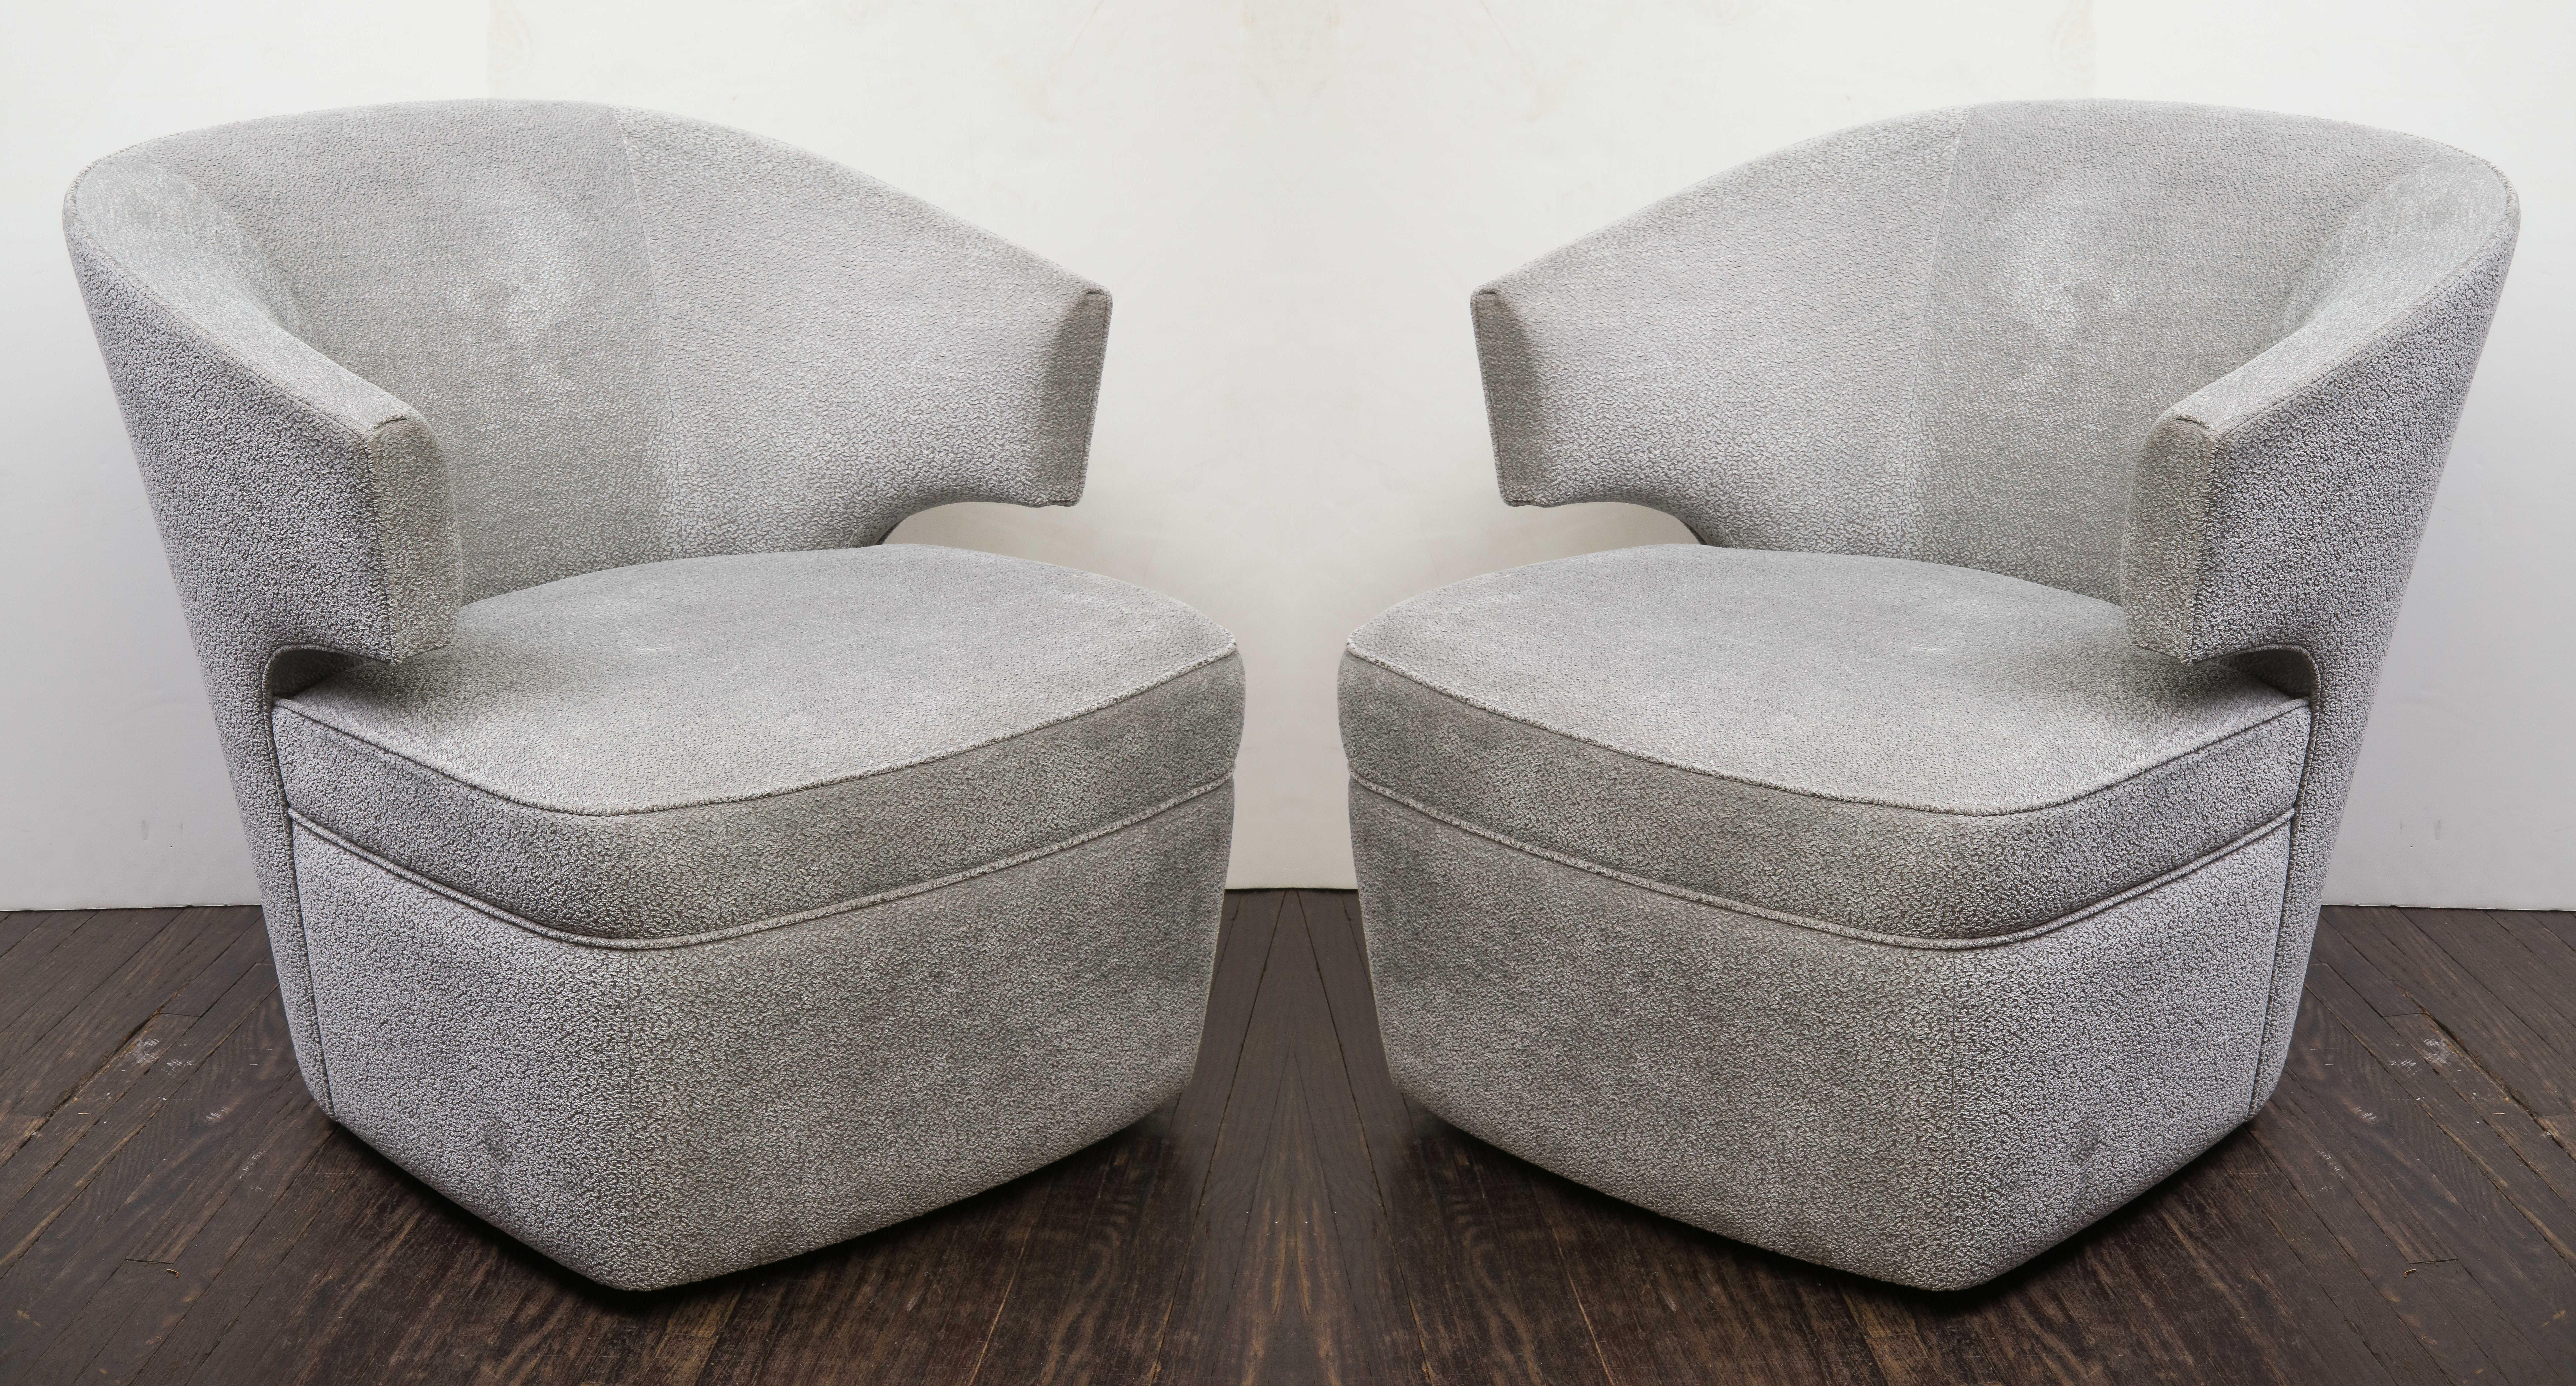 Custom-made pair of swivel tub chairs available with customer-owned material (COM). The price is for a pair and does not include the cost for fabric. 5 yards are required per chair. Customizations are available for different dimensions and designs.